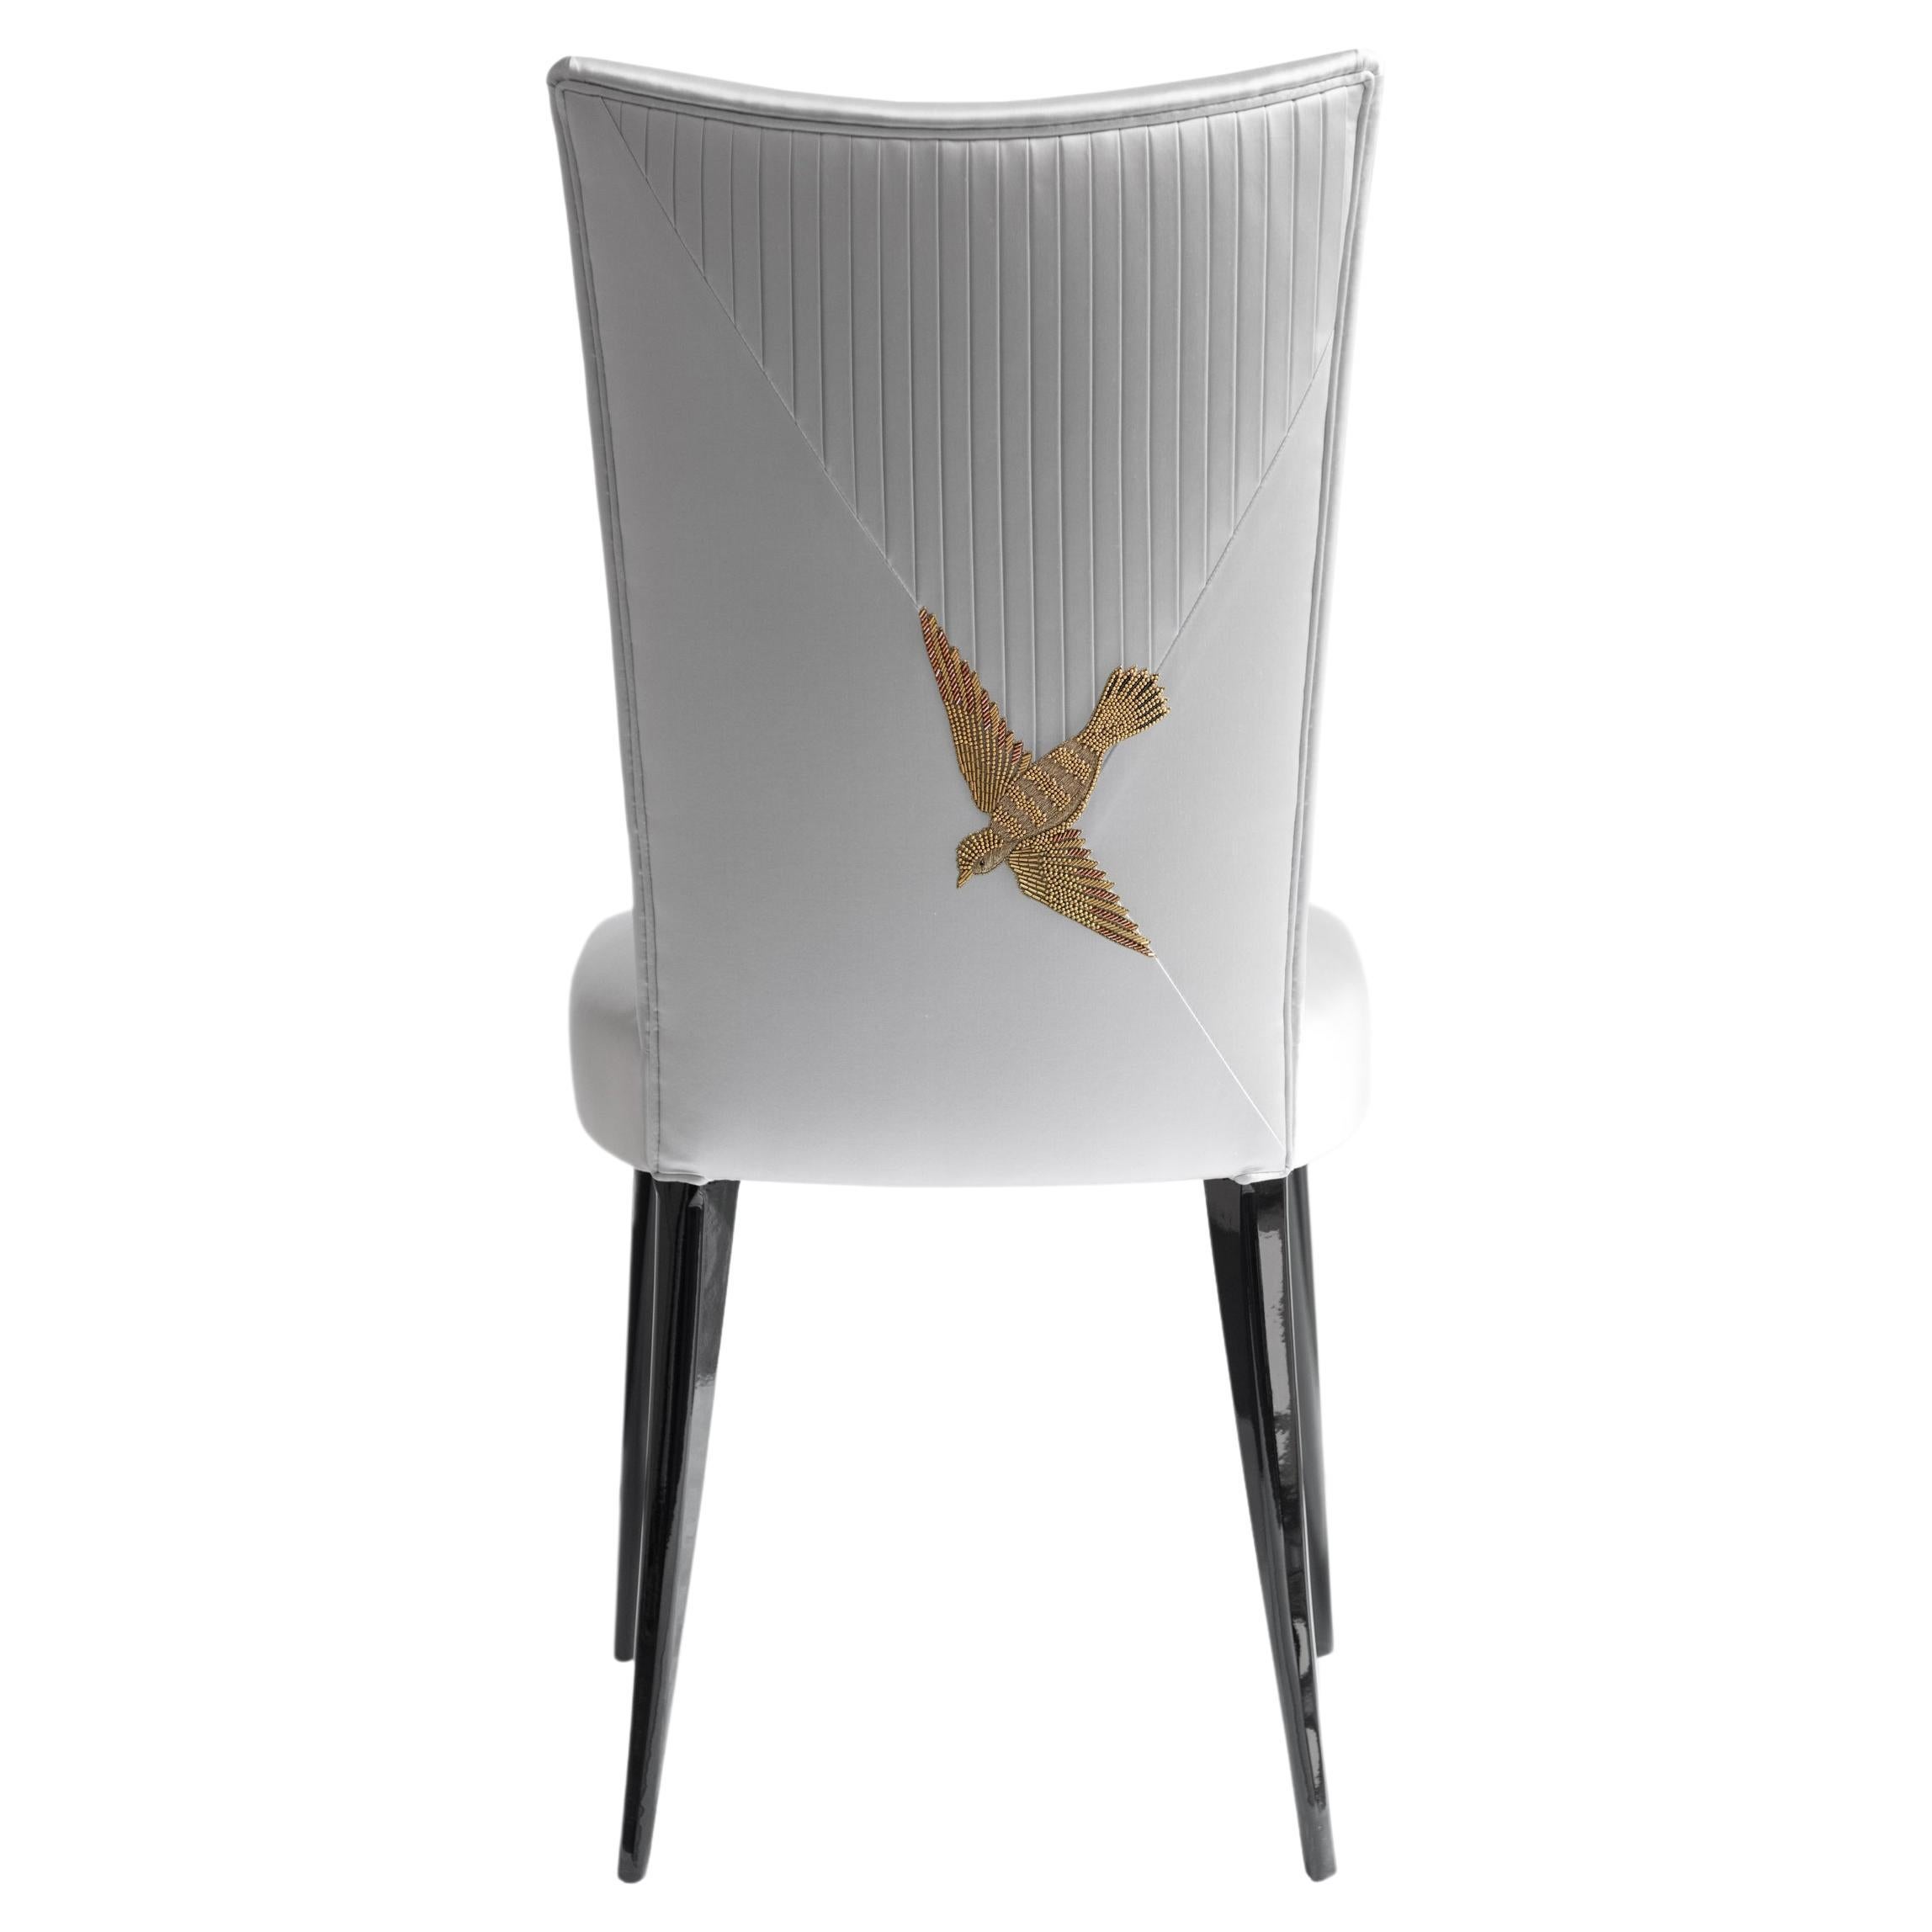 Aiveen Daly Paradise Stiletto Chair For Sale